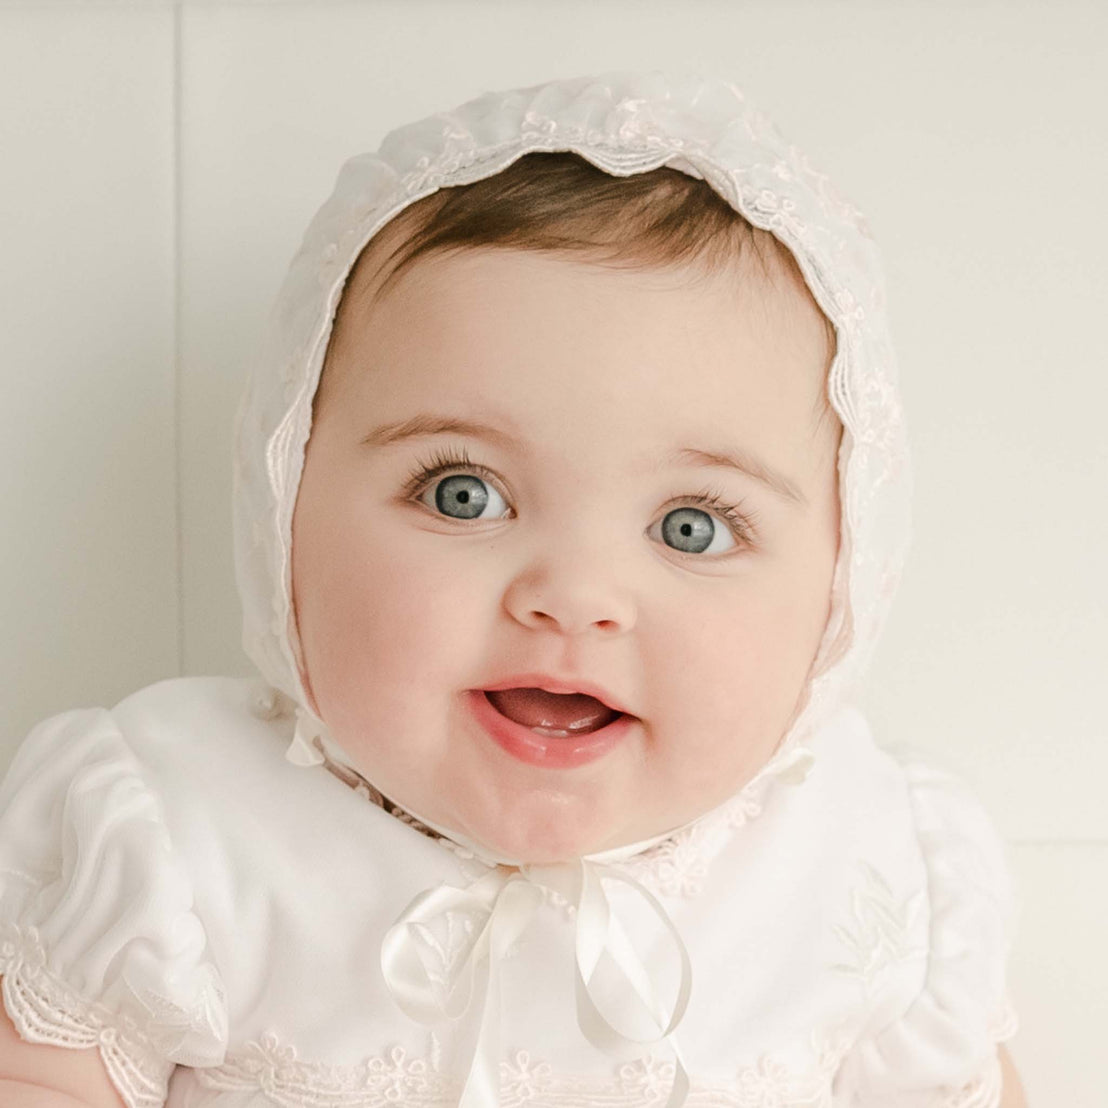 A cheerful baby dressed in a vintage-inspired, white baptism dress and Joli Fitted Bonnet with lace detailing, looking upwards with big blue eyes and a joyful expression.